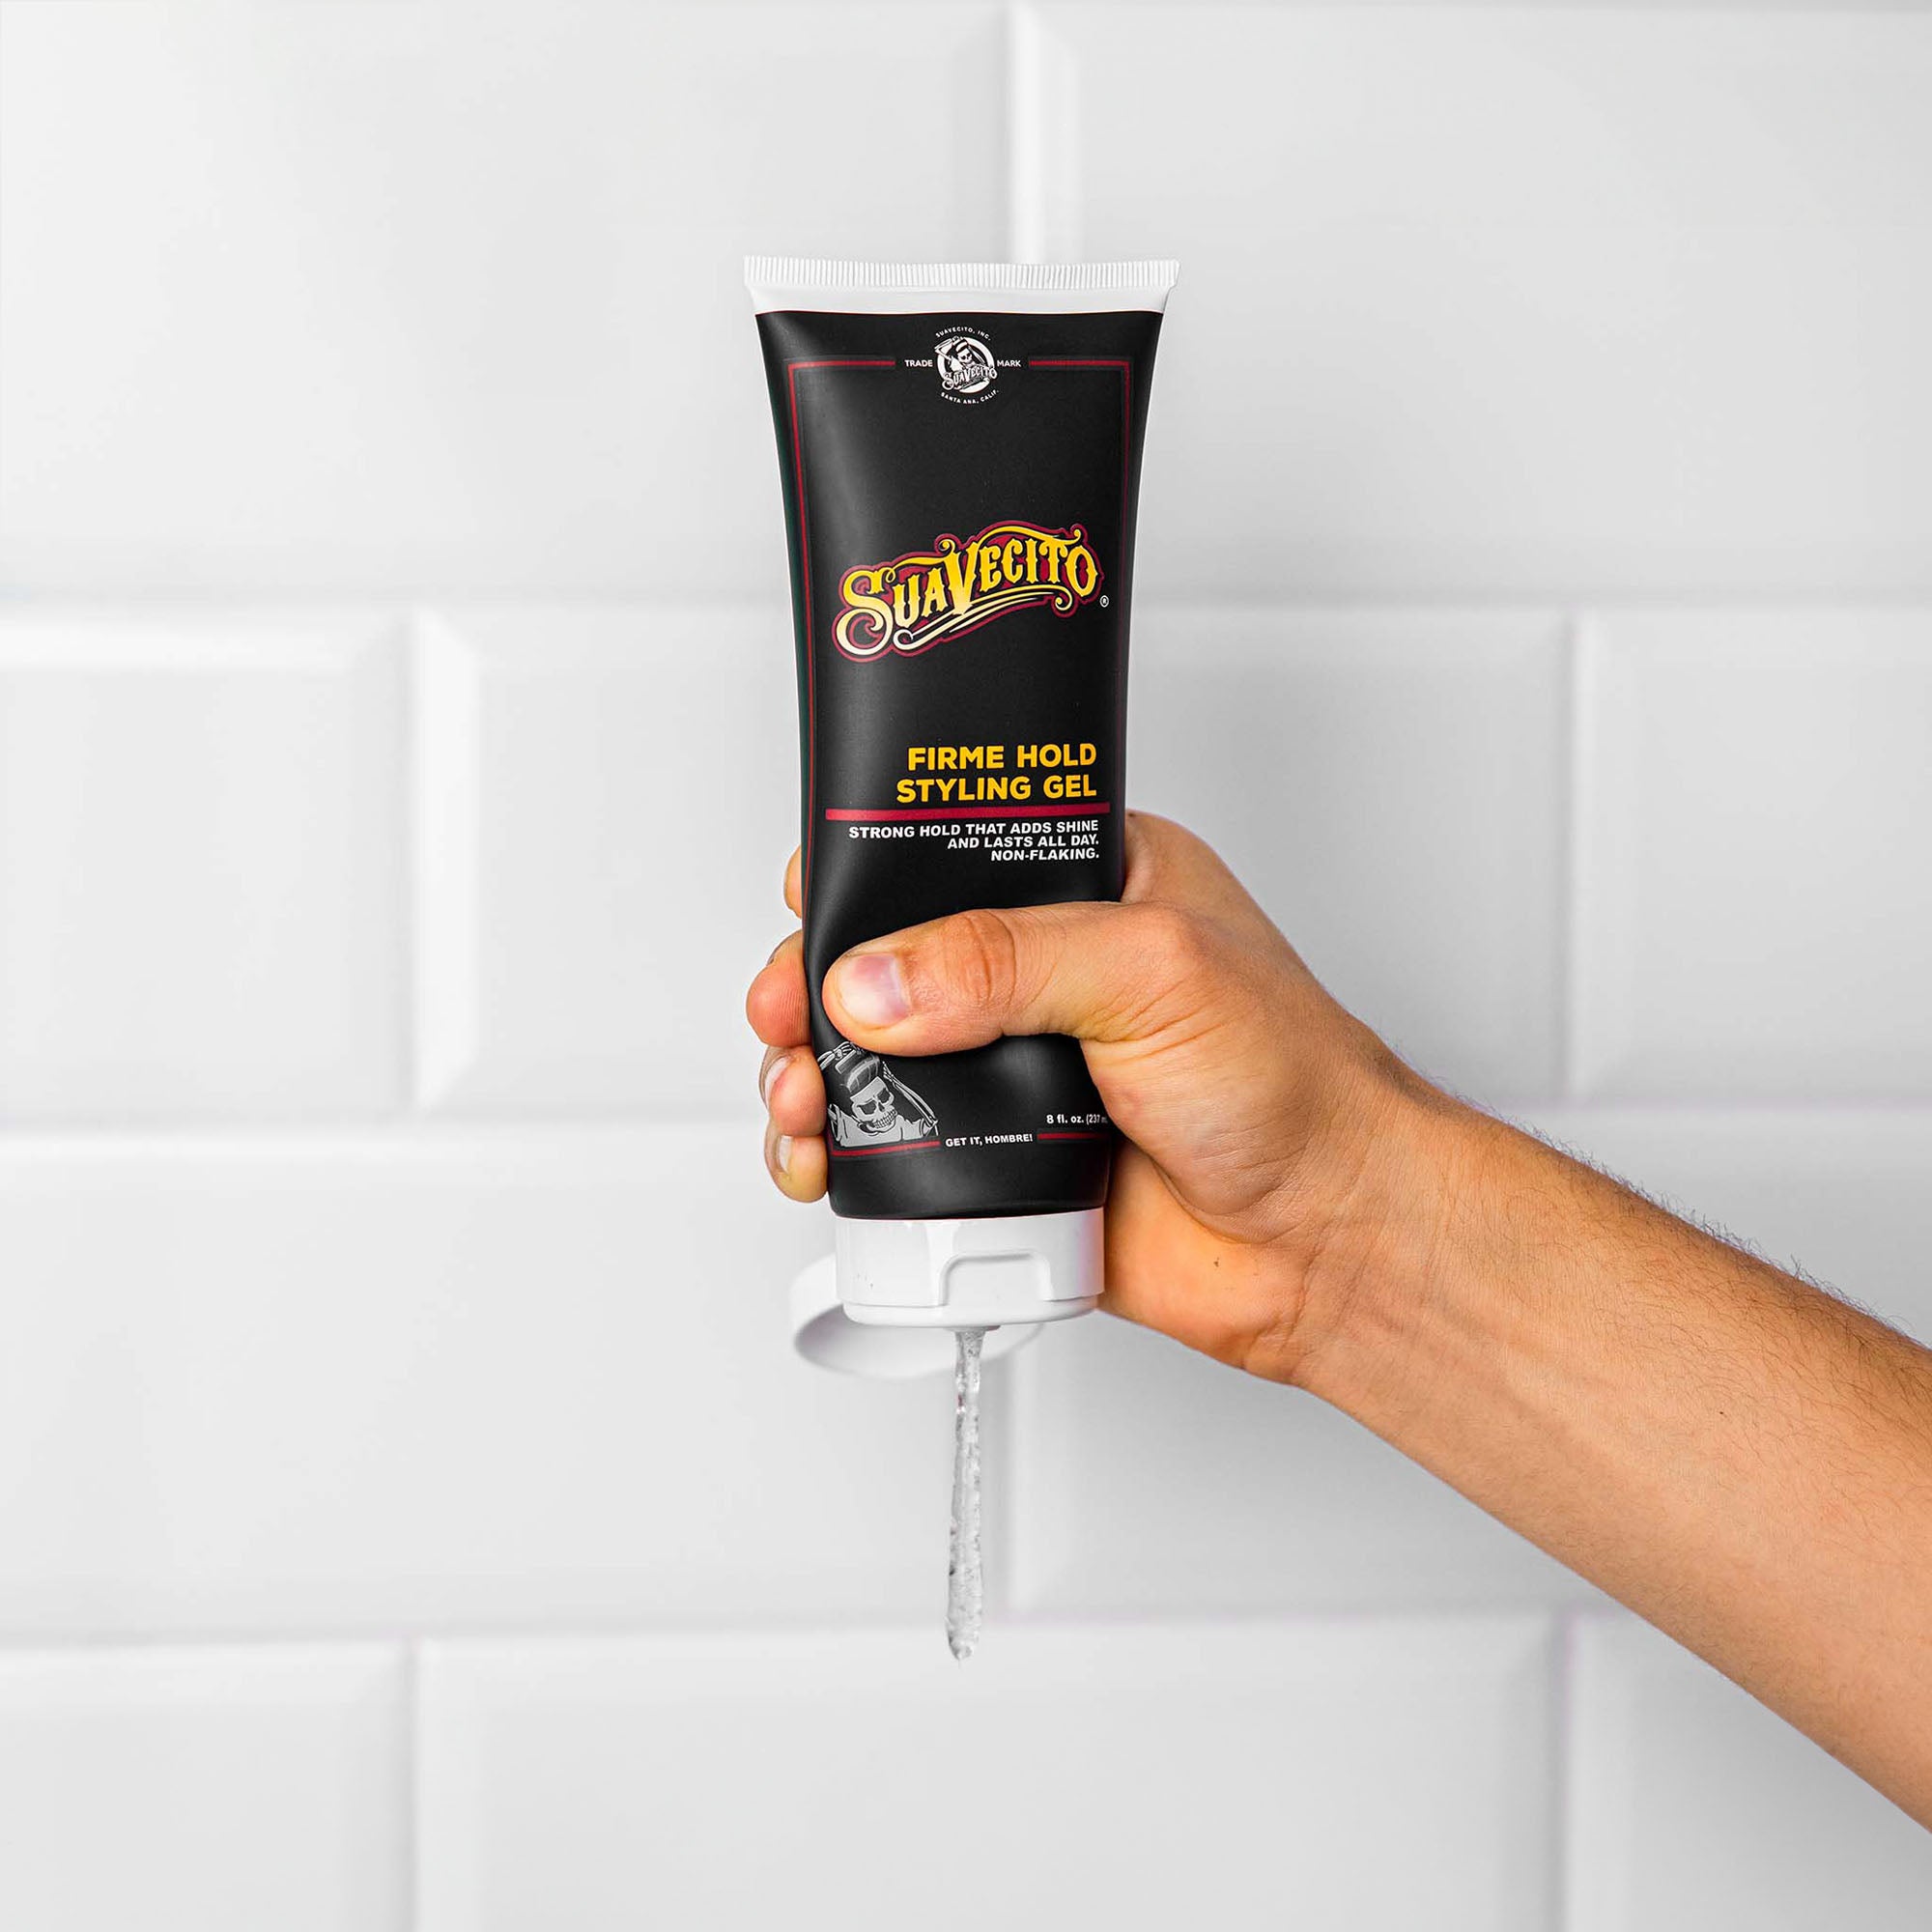 Suavecito Firme Hold Styling Gel / 8OZ